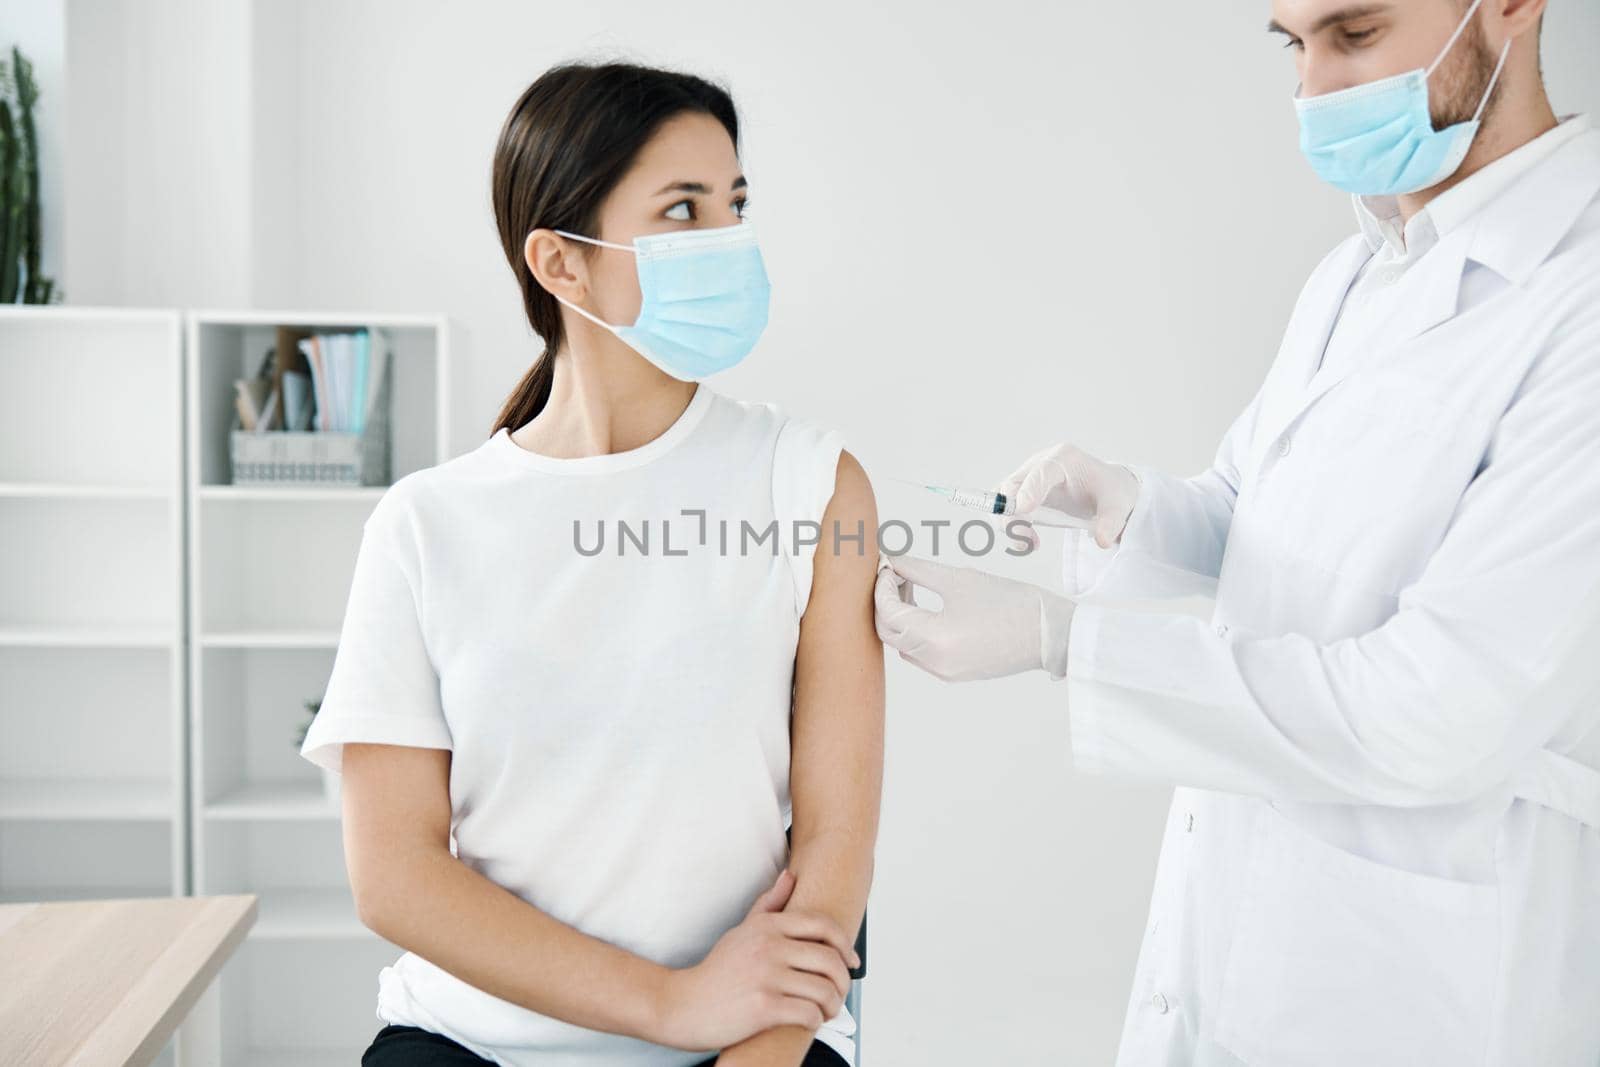 doctor in a medical smear injections to a woman patient from coronavirus by SHOTPRIME